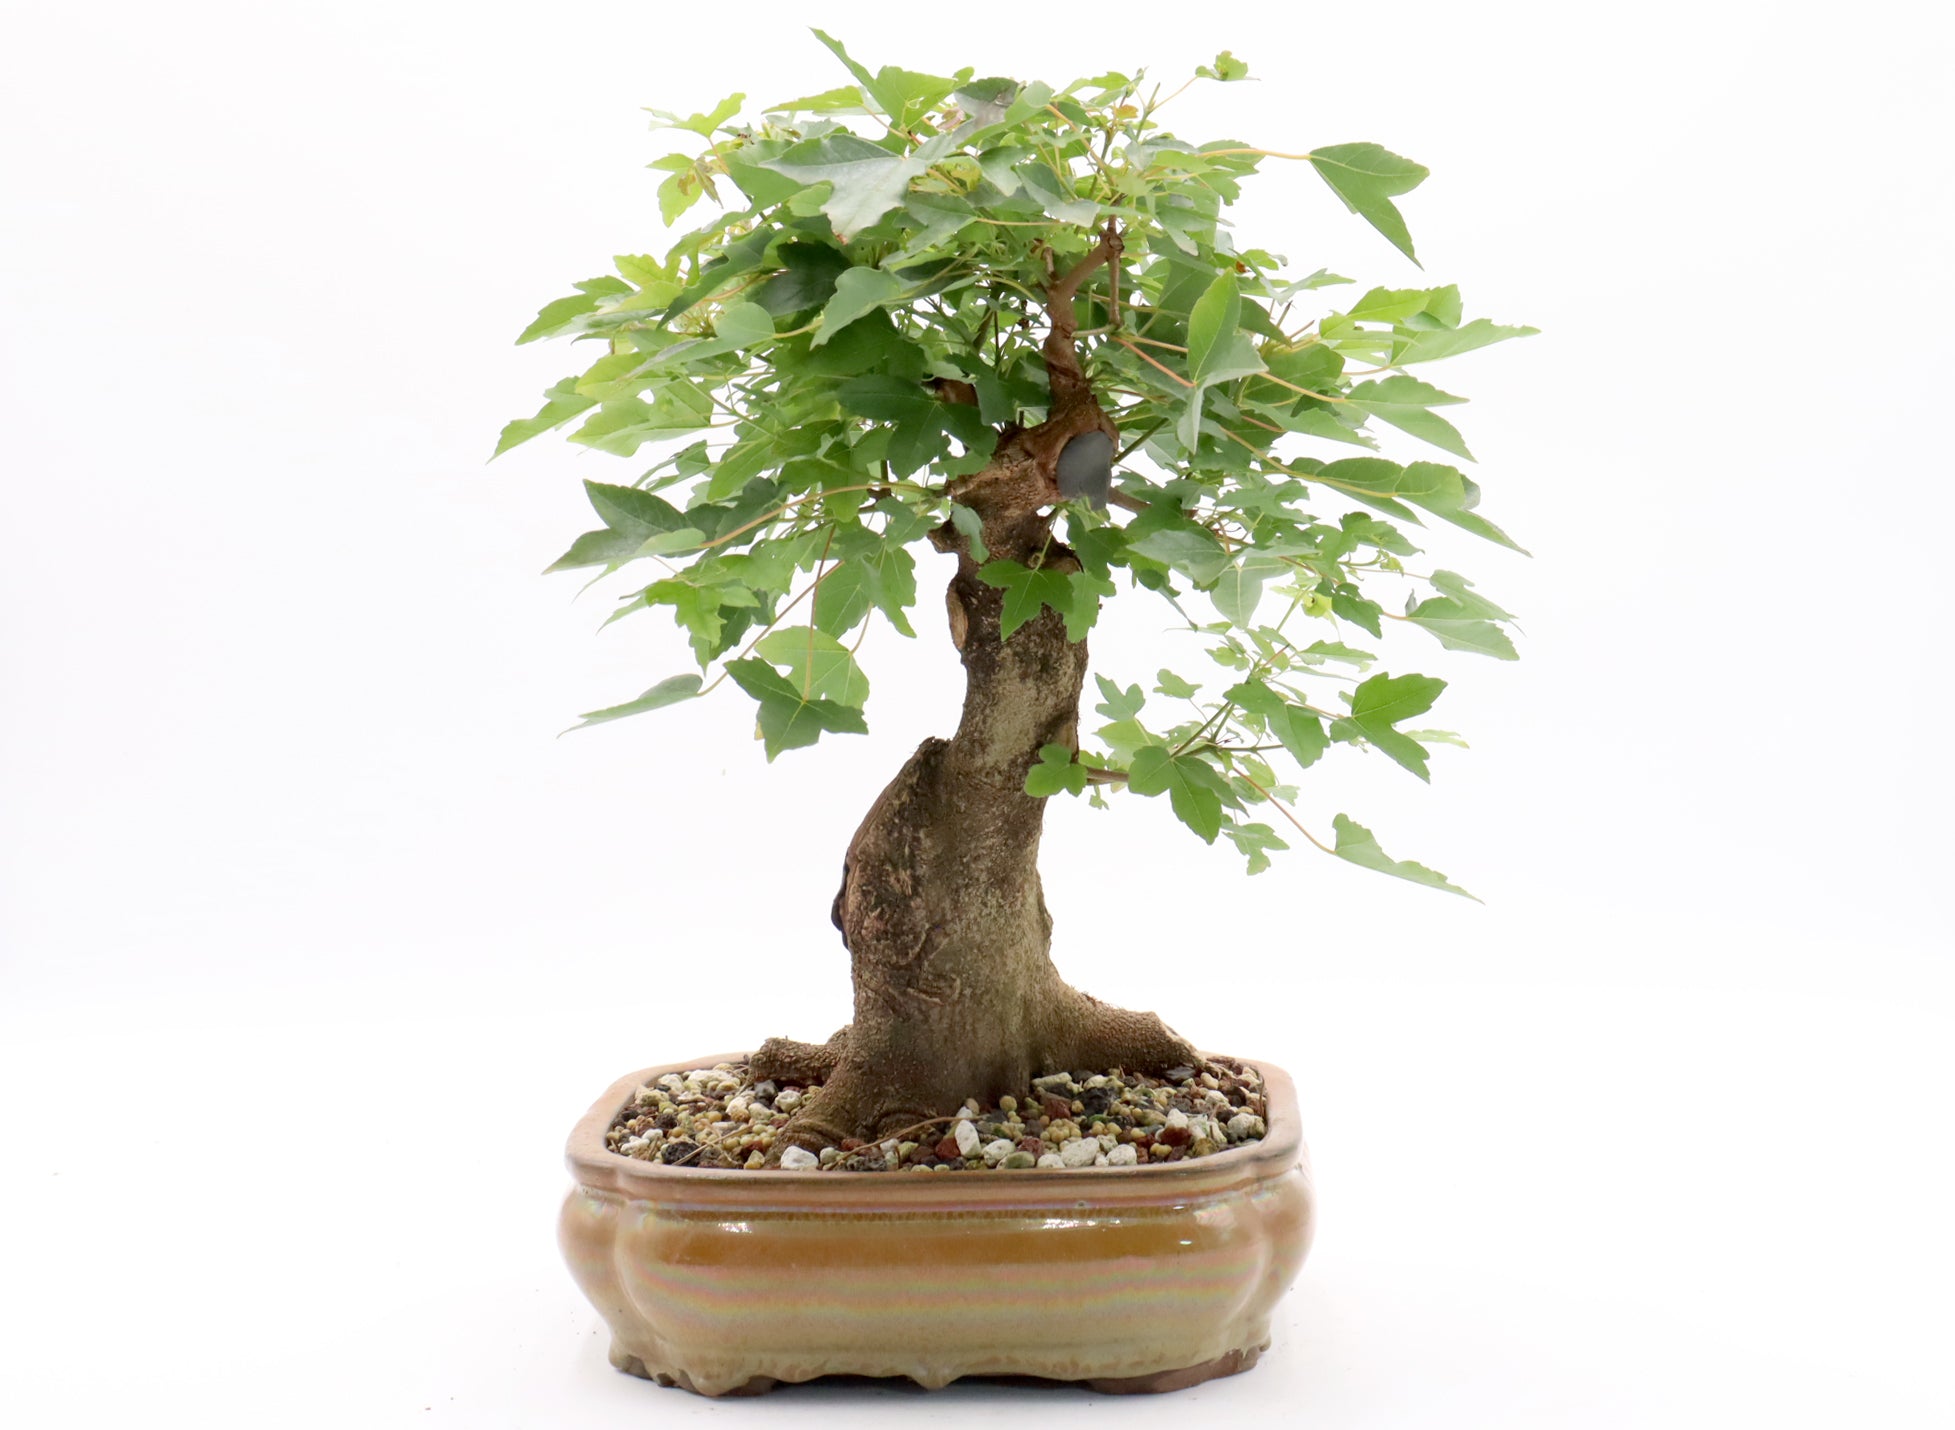 Trident Maple Bonsai in a Chinese Container